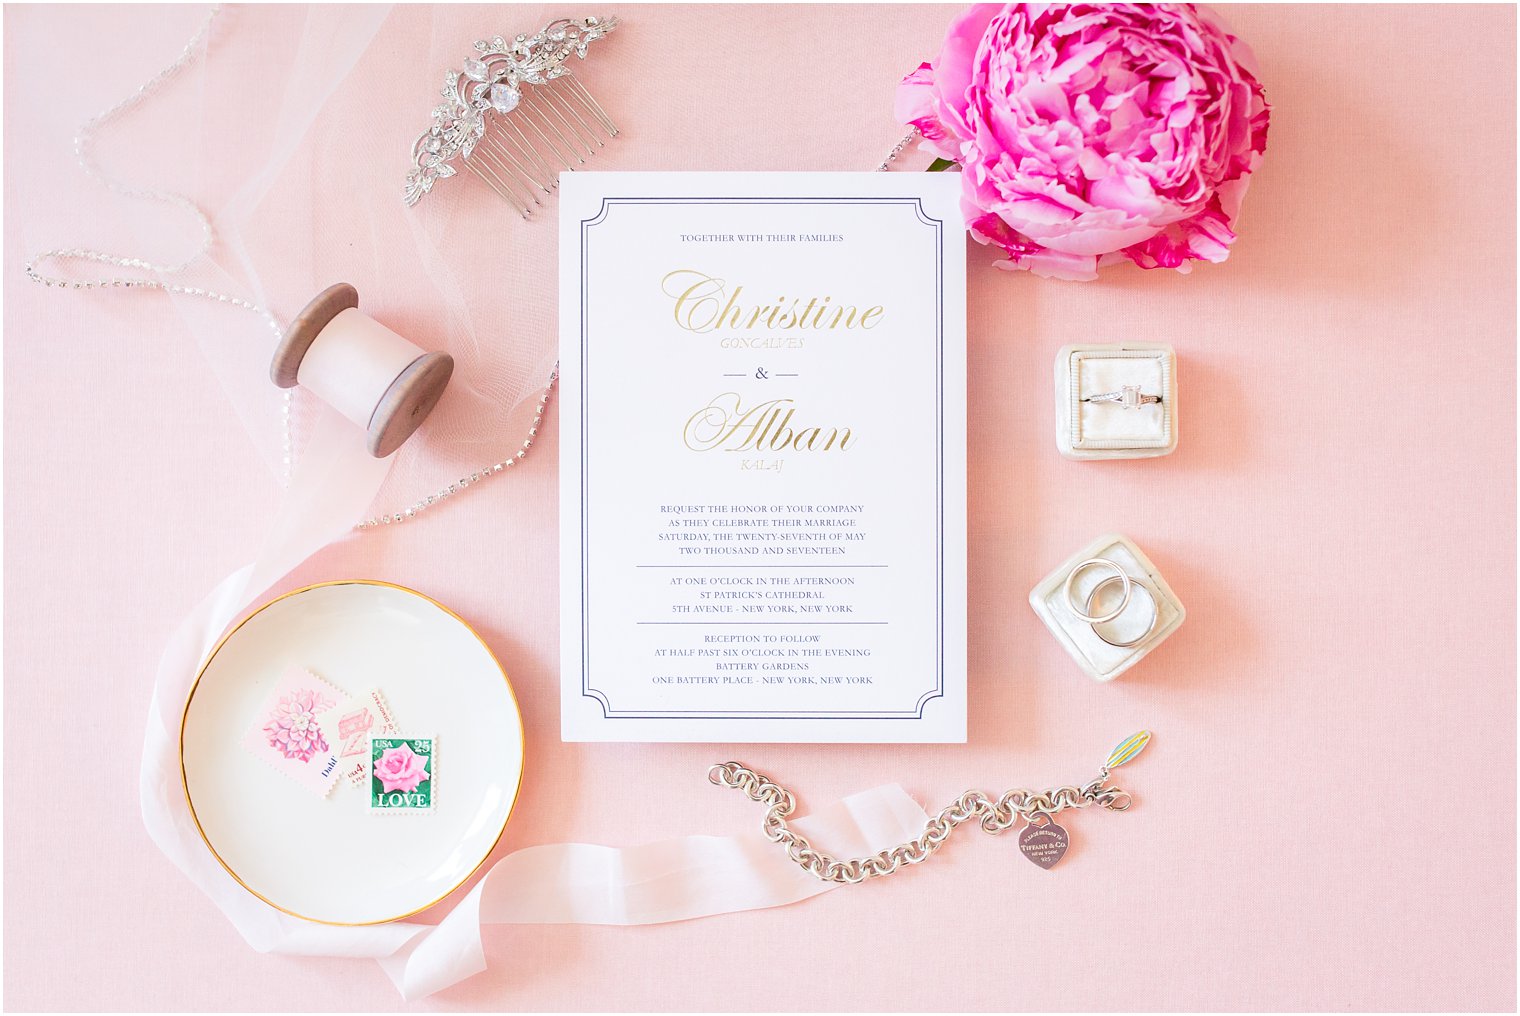 Invitation on pink styling board | St. Patrick's Cathedral Wedding Photos